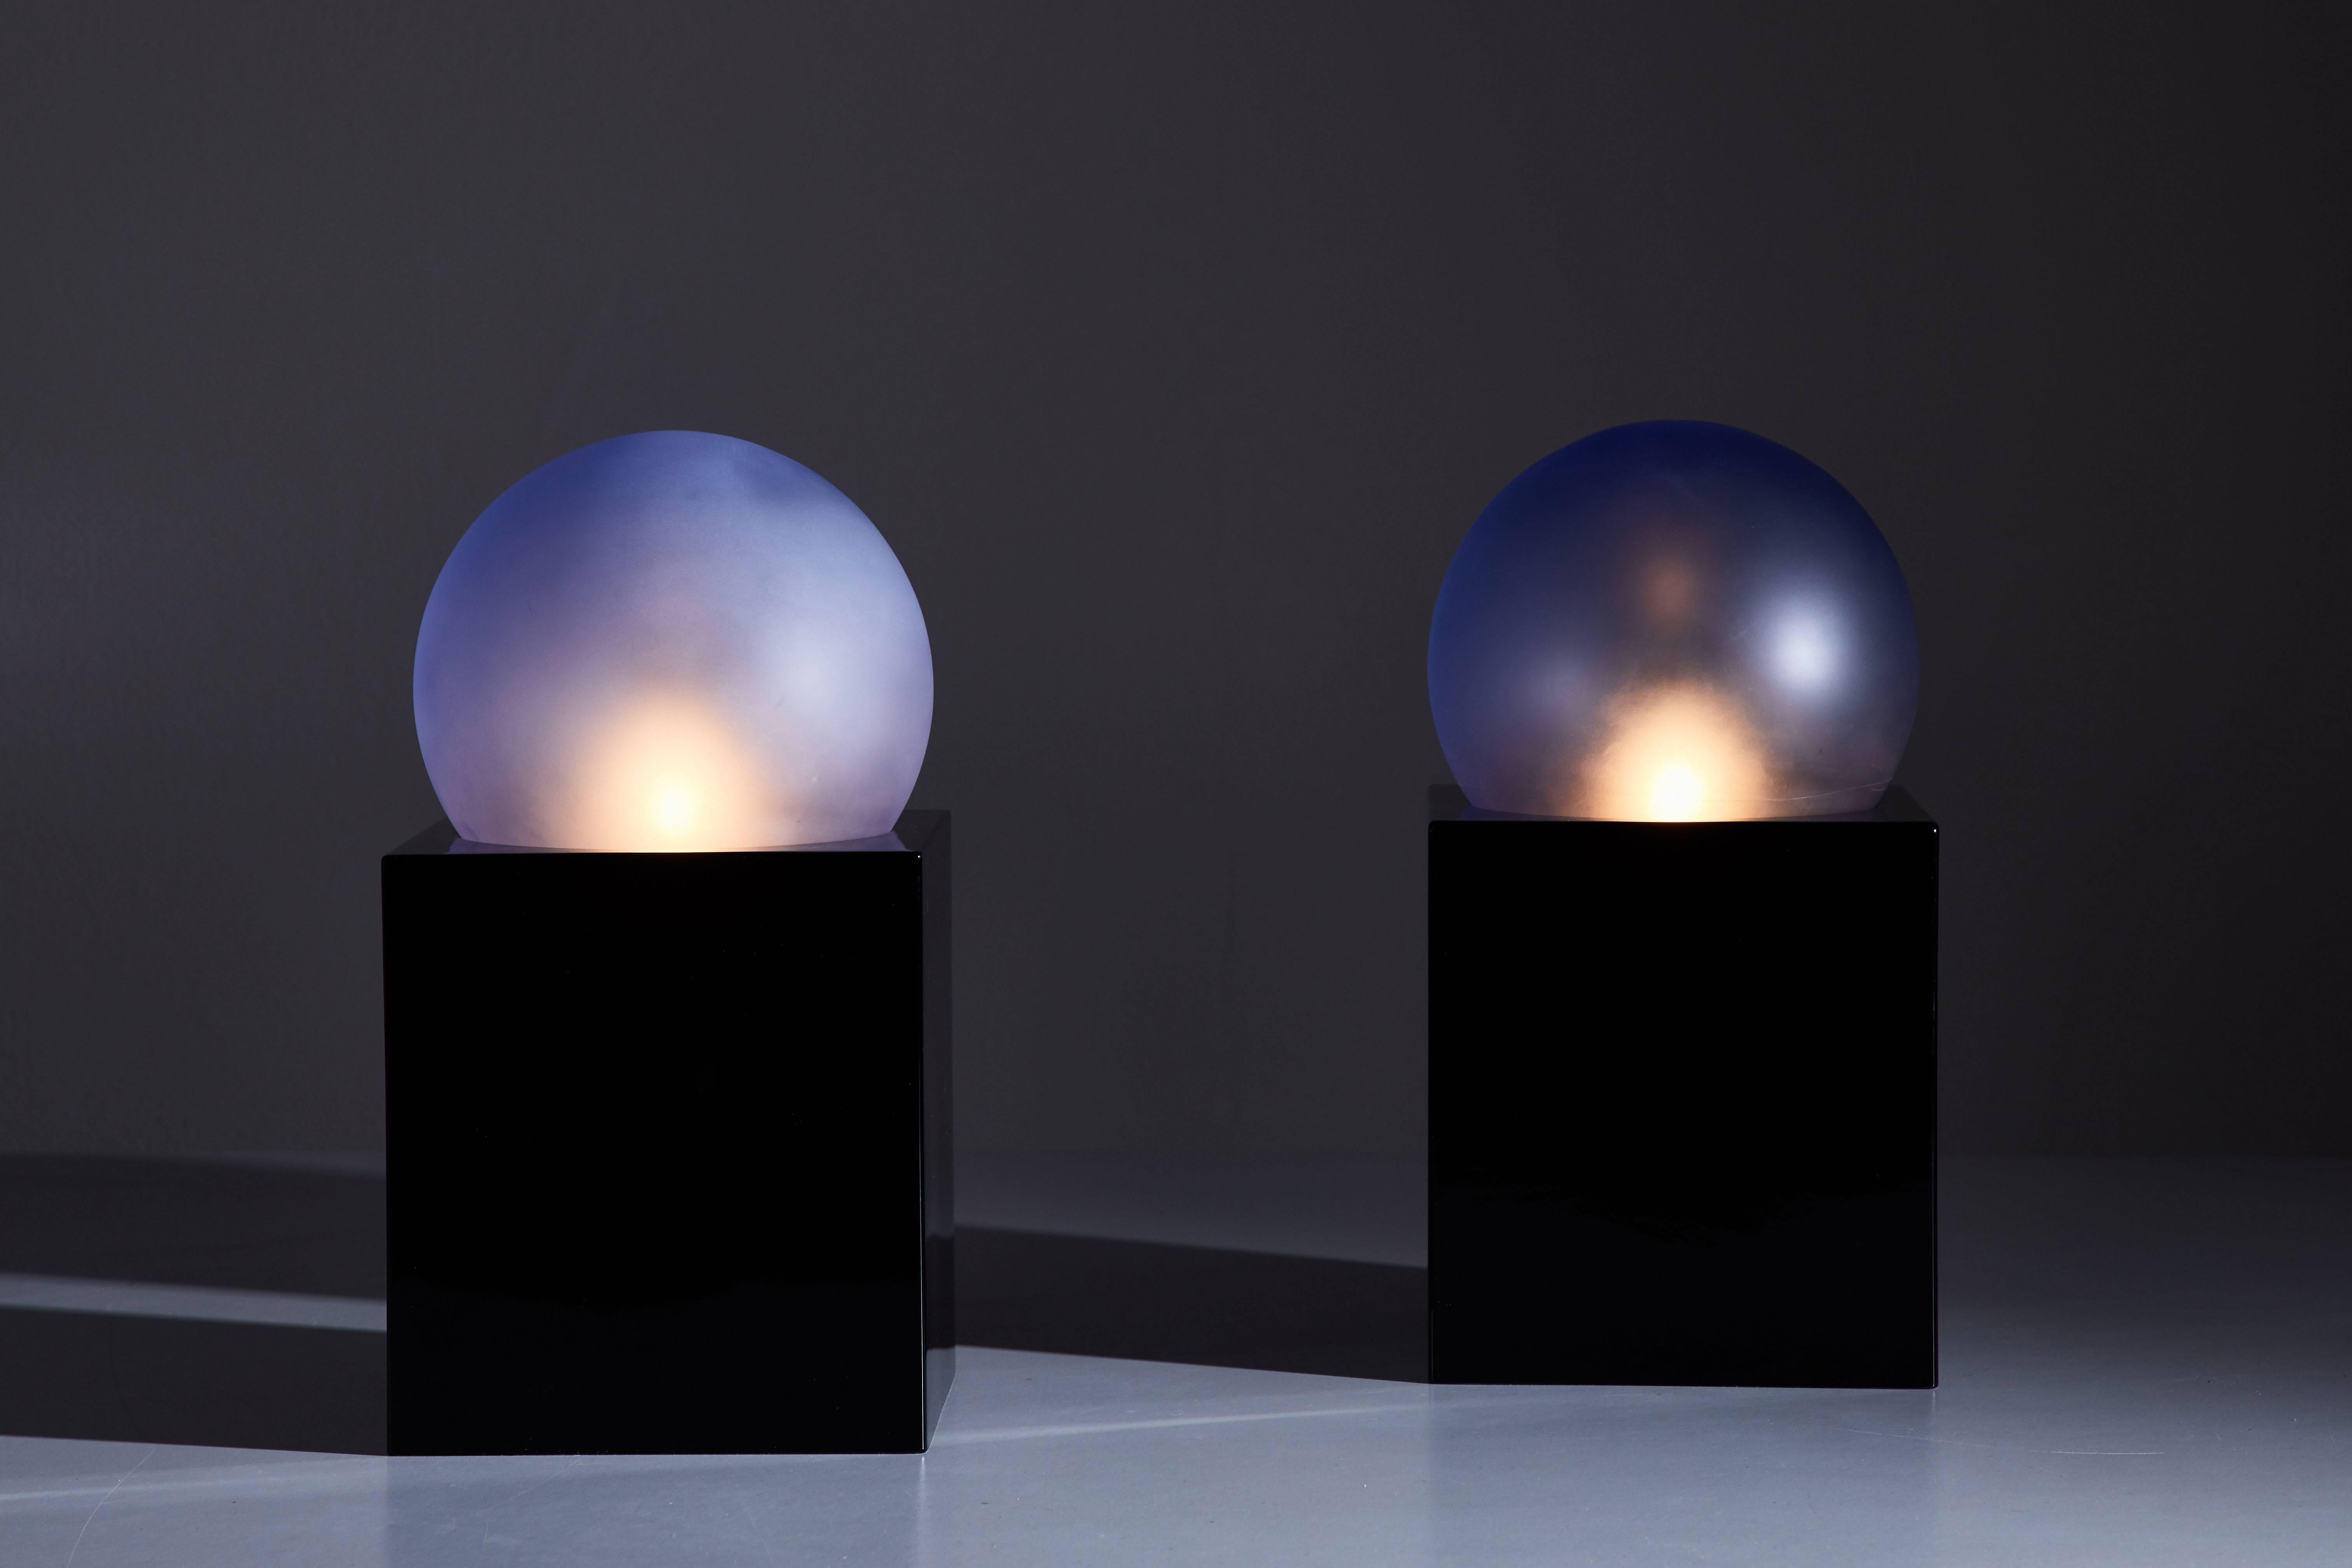 Pair of Alba table lamps by Ettore Sotsass for energy company Enel. Designed in Italy, 2001. Black glass base with blue glass diffusers. Original cords with on/off switch. Each light takes one American candelabra 40w maximum bulb. Manufactures